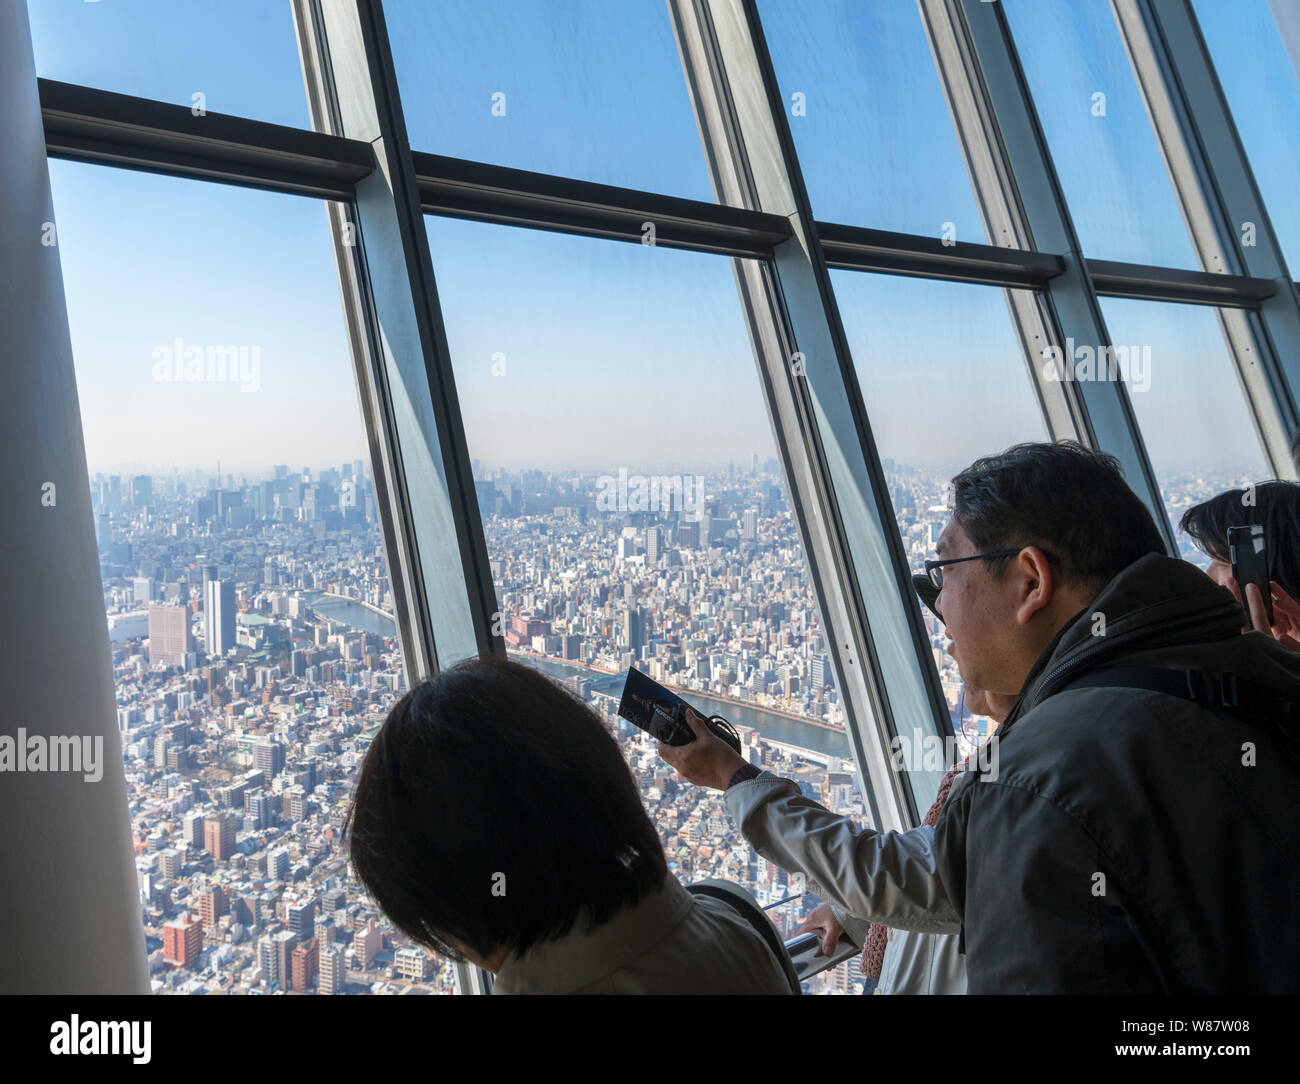 Visitors enjoying the aerial view over the city from the observation deck of the Tokyo Skytree,Tokyo, Japan Stock Photo